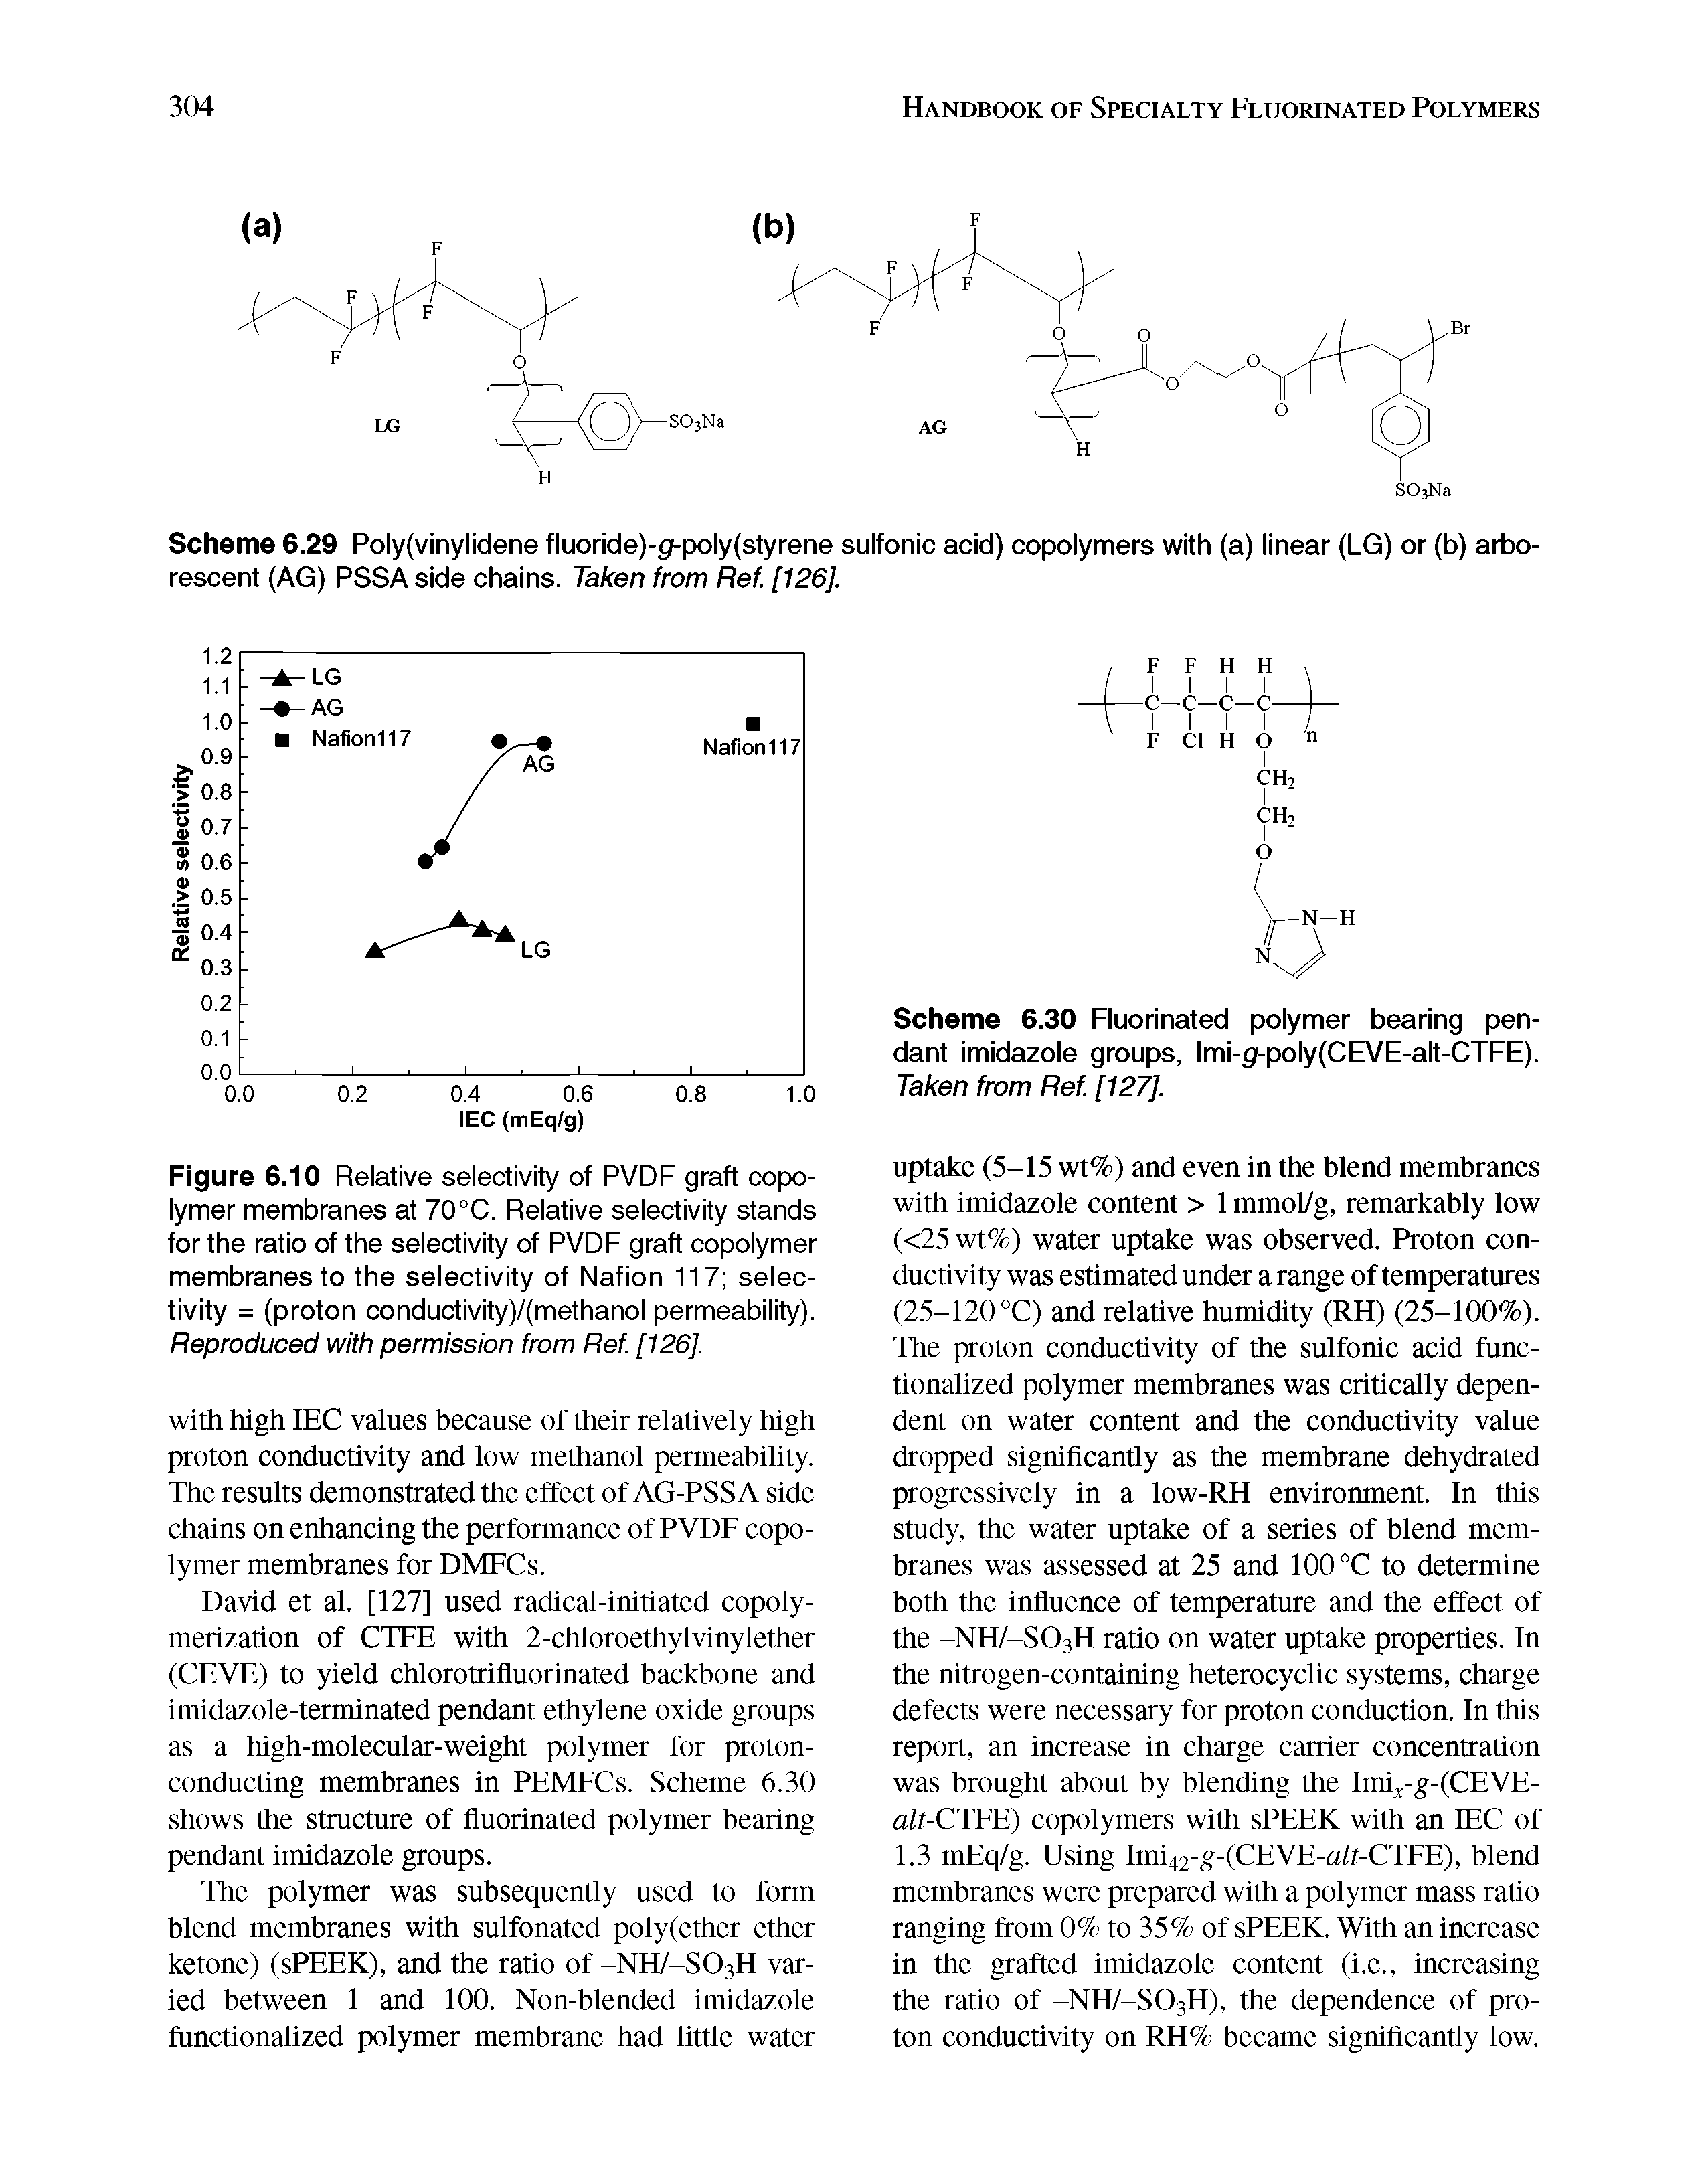 Scheme 6.29 Poly(vinylidene fluoride)-gf-poly(styrene sulfonic acid) copolymers with (a) linear (LG) or (b) arborescent (AG) PSSA side chains. Taken from Ref. [126],...